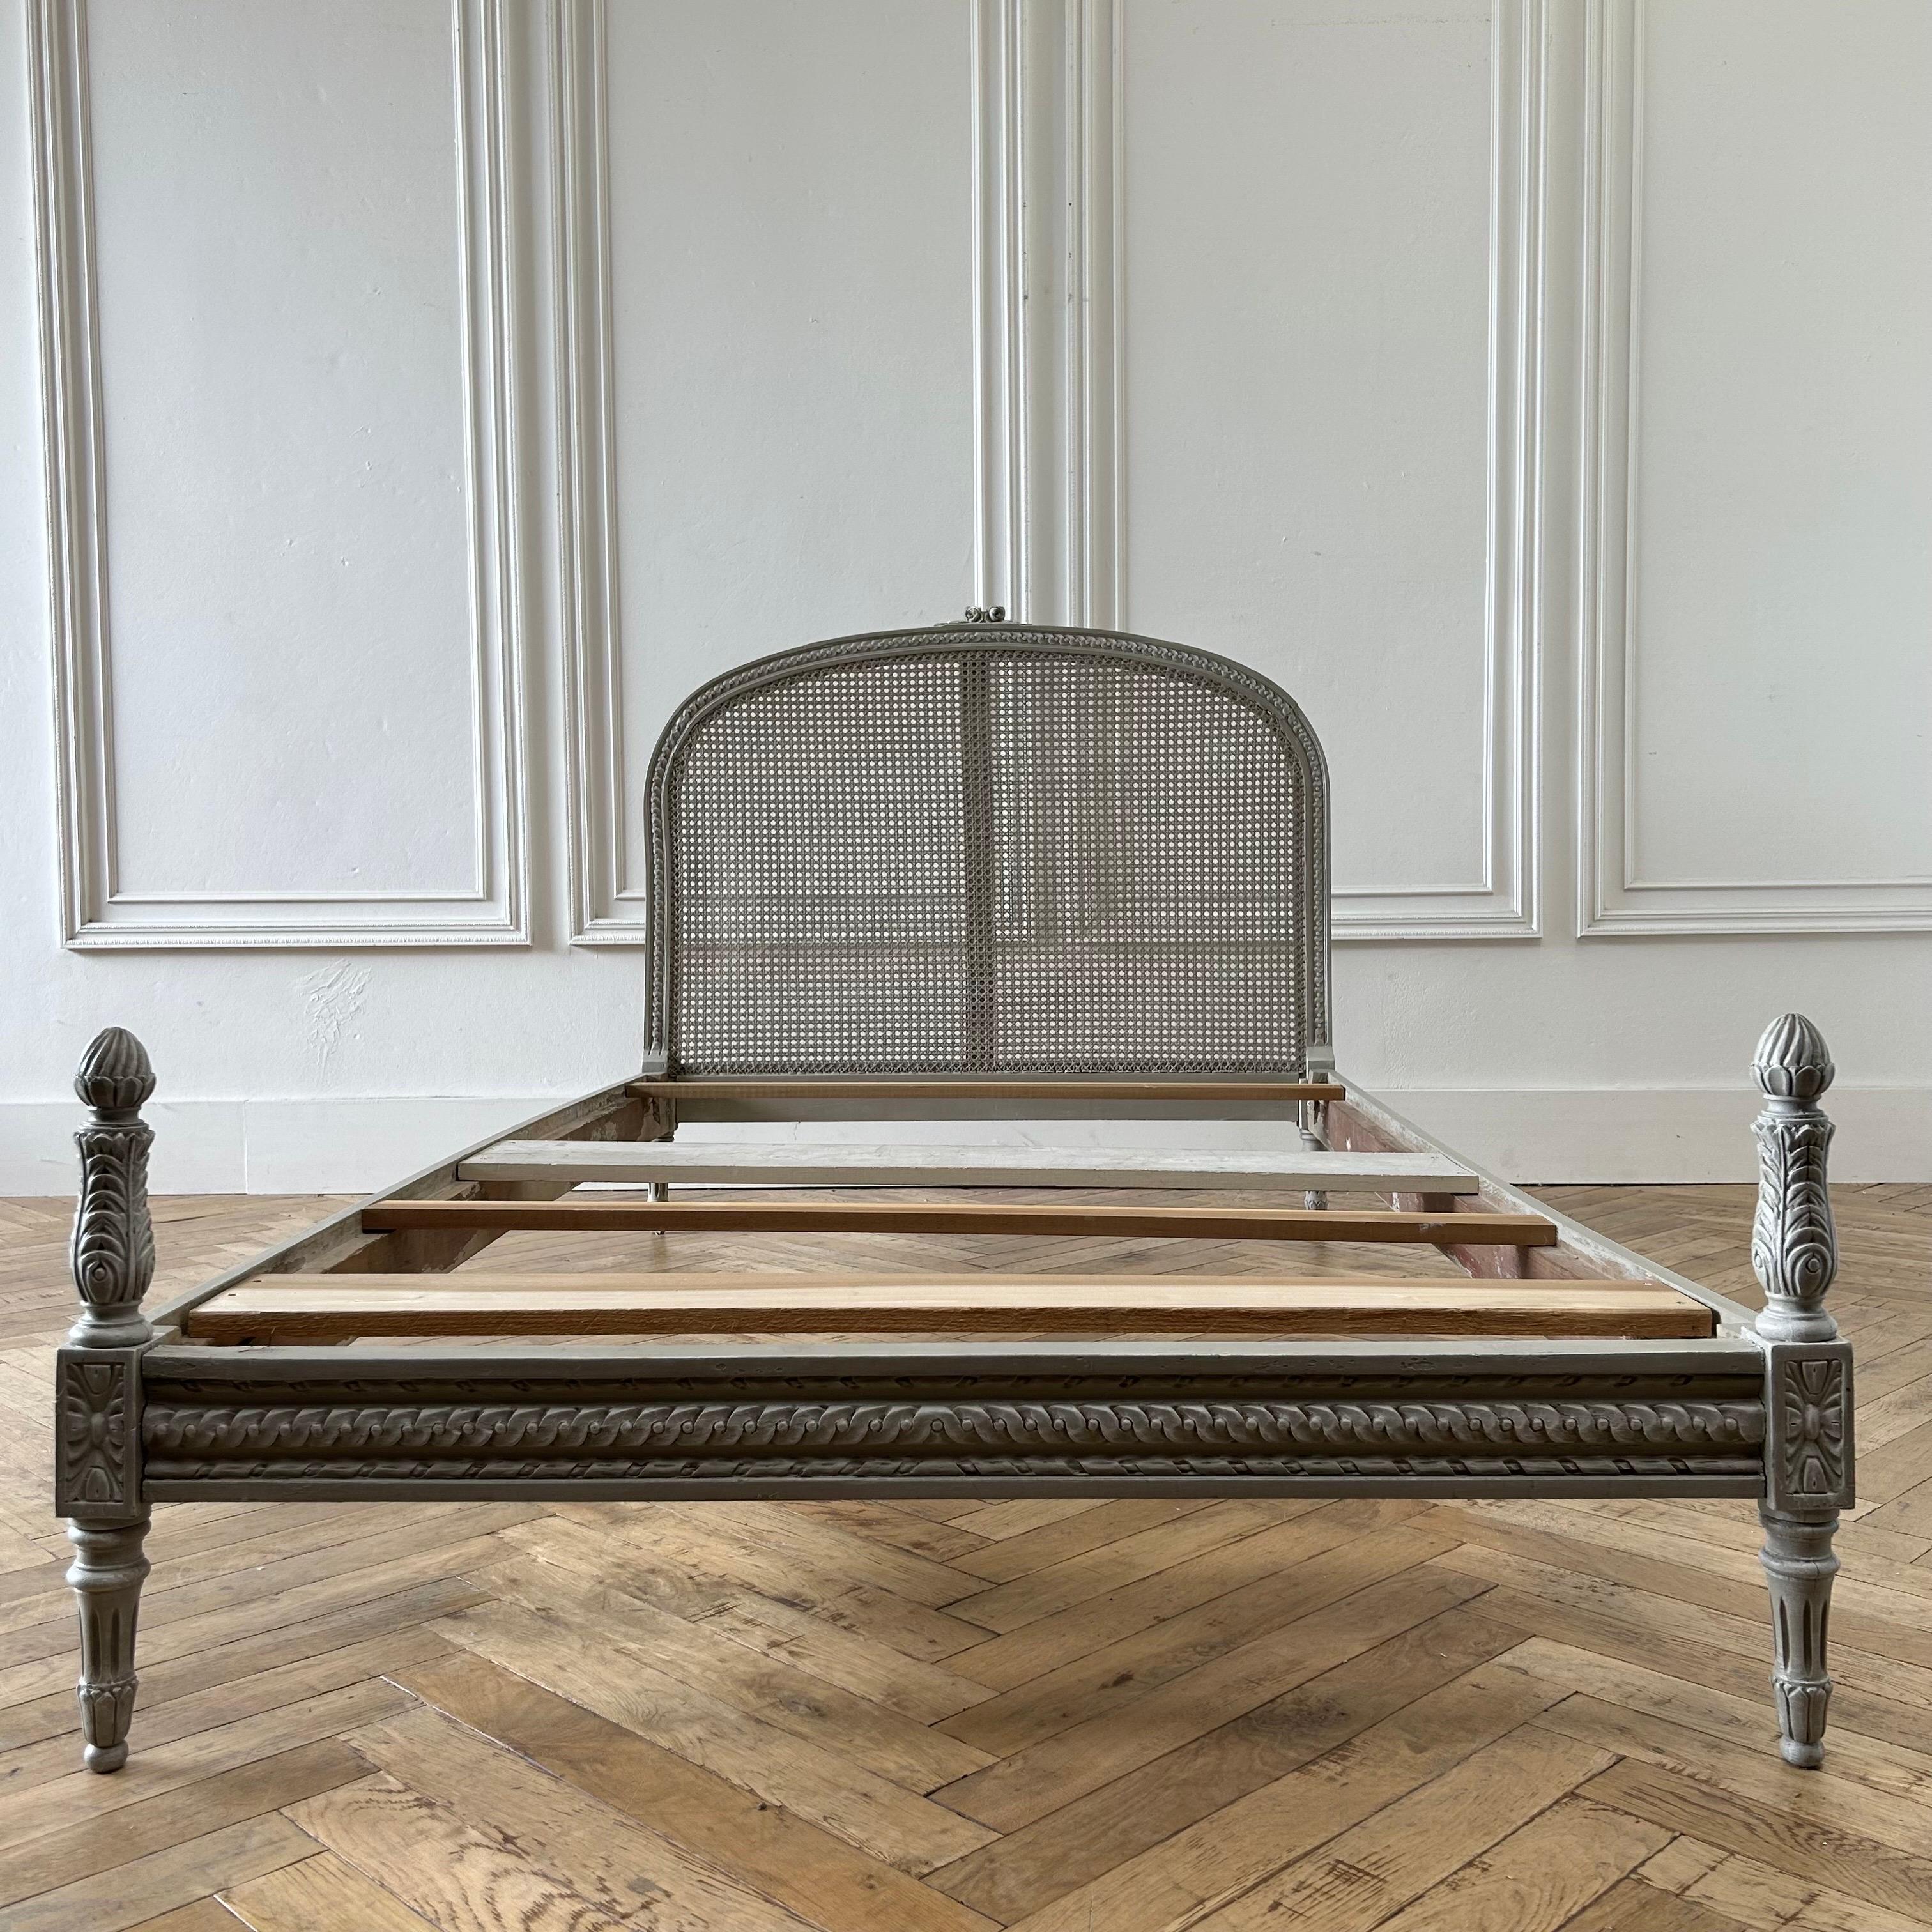 Antique cane bed 47”w x 82”d x 43”h Footboard:20”h 
Inside: 45”w x 78”d
Painted in a french dove gray, with beautiful carved roses, and french cane headboard.
Solid and sturdy ready for daily use. 
This is a european full size, it requires a